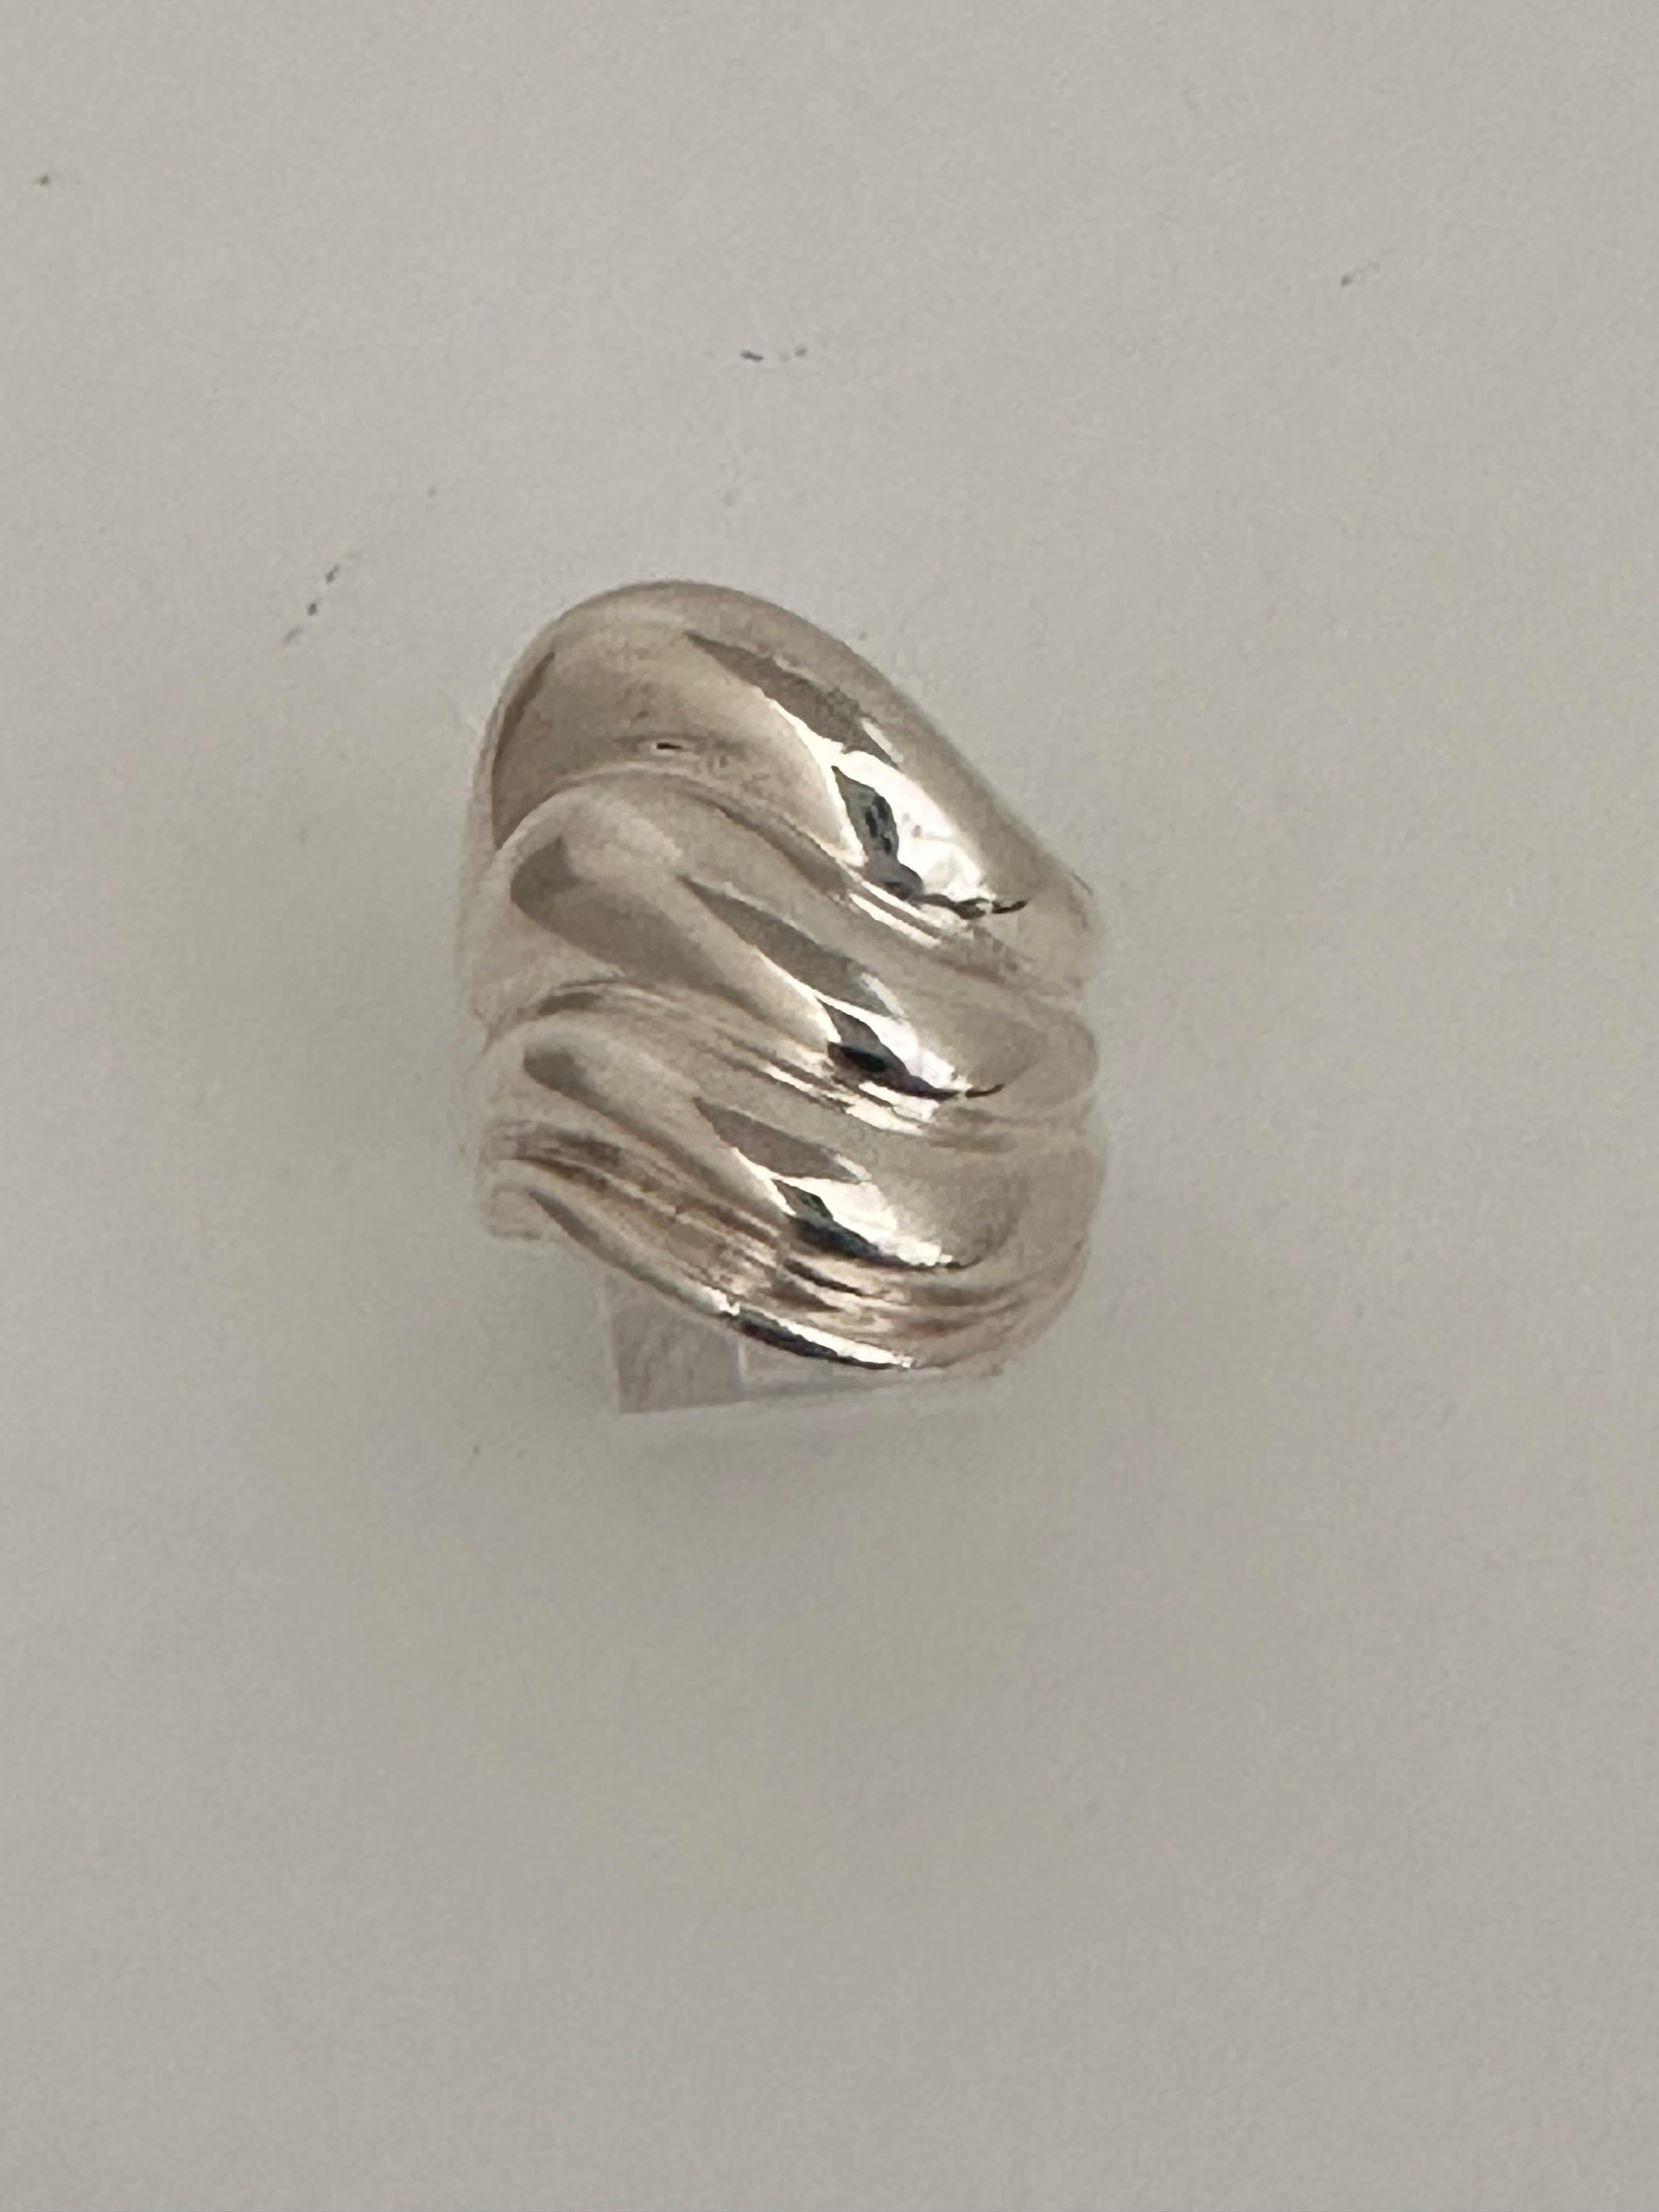 ZINA ~ Sterling Silver .925 ~ ZINA ~ 26mm x 22mm ~ Wave Ring ~ Large heavy Ring
Size 7 1/4

THEORY OF GIVING:
Silver has been important to mankind since before the Bible was written. It was used to appease kings, emperors, and conquerors. 
Silver